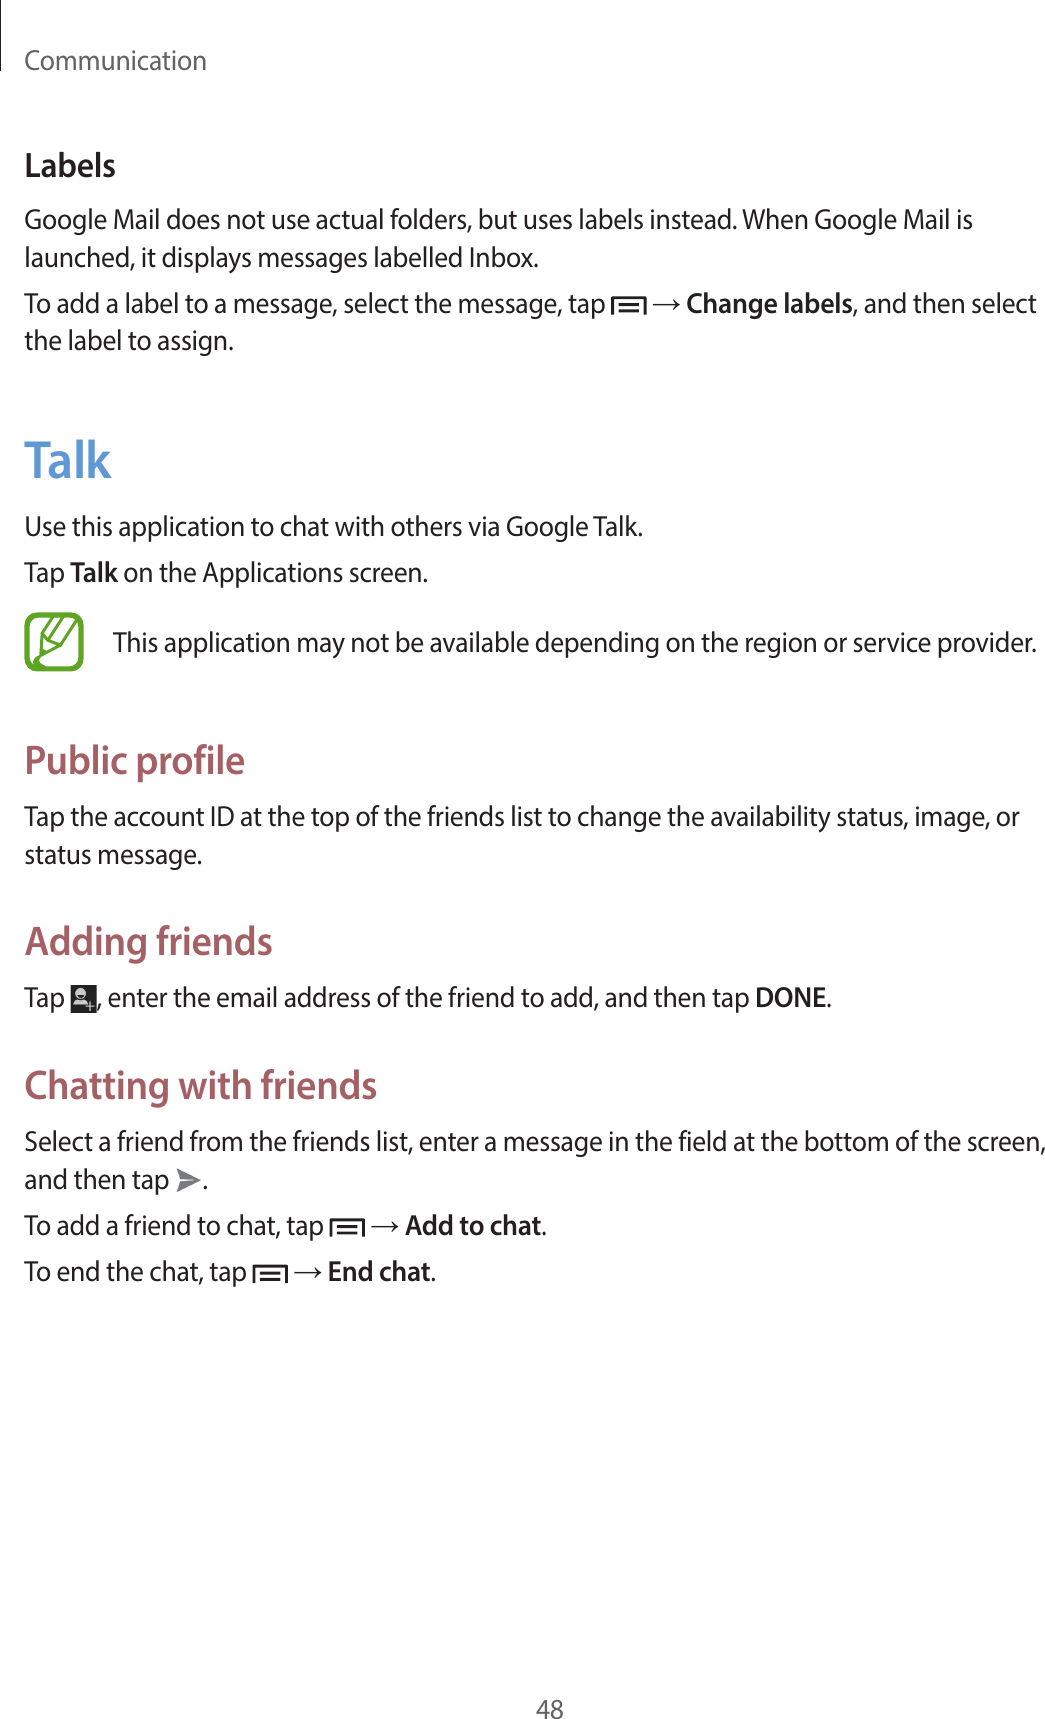 Communication48LabelsGoogle Mail does not use actual folders, but uses labels instead. When Google Mail is launched, it displays messages labelled Inbox.To add a label to a message, select the message, tap   → Change labels, and then select the label to assign.TalkUse this application to chat with others via Google Talk.Tap Talk on the Applications screen.This application may not be available depending on the region or service provider.Public profileTap the account ID at the top of the friends list to change the availability status, image, or status message.Adding friendsTap  , enter the email address of the friend to add, and then tap DONE.Chatting with friendsSelect a friend from the friends list, enter a message in the field at the bottom of the screen, and then tap  .To add a friend to chat, tap   → Add to chat.To end the chat, tap   → End chat.